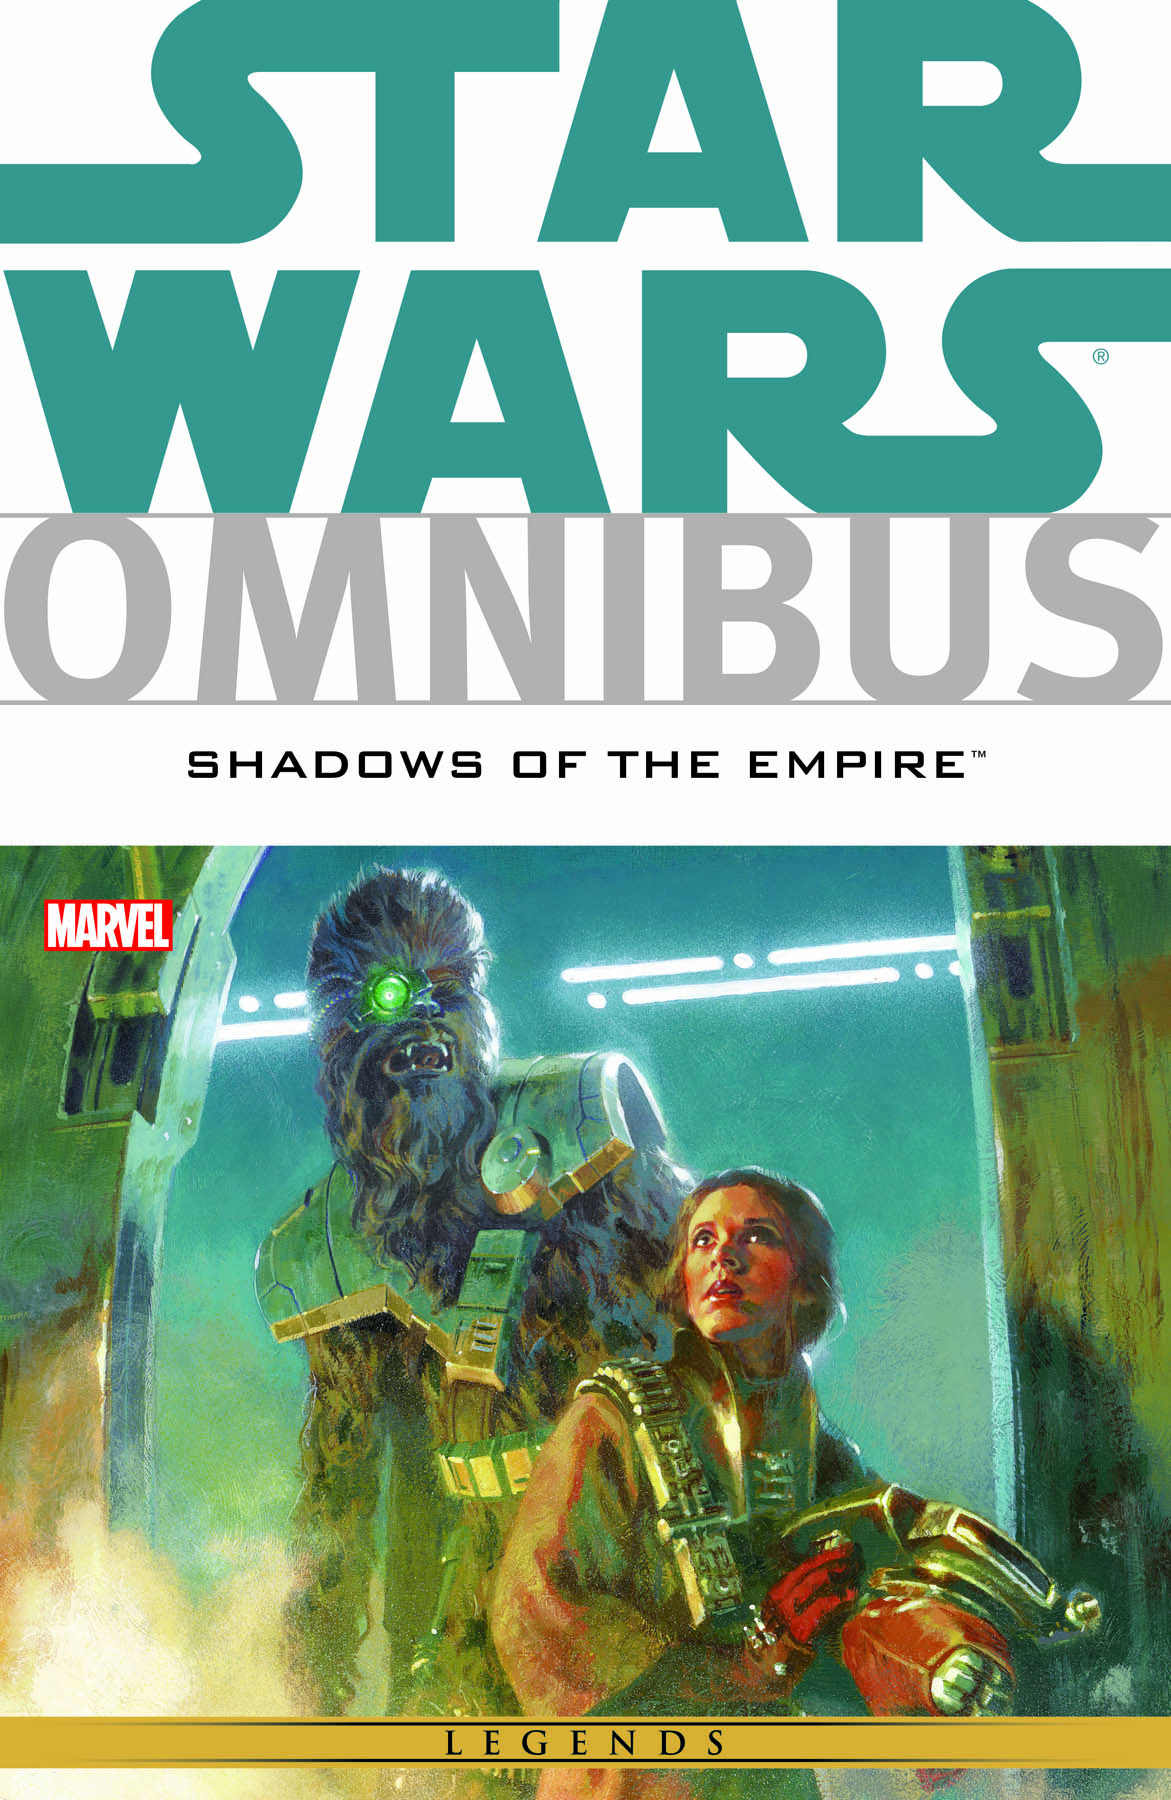 Star Wars Omnibus: Shadows of the Empire (Trade Paperback)